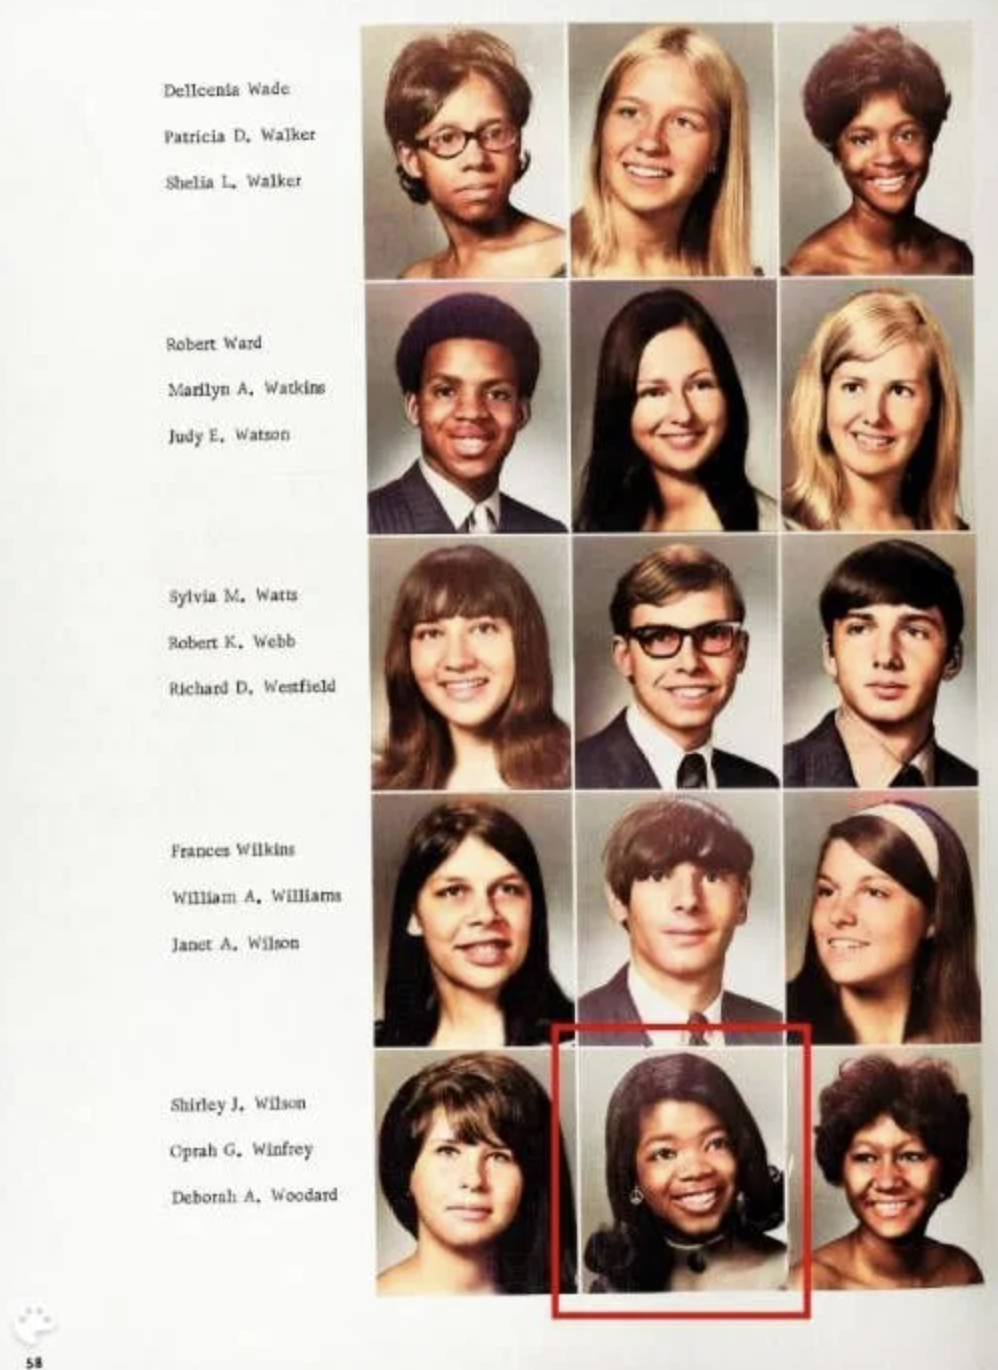 20 Surreal Celebrity Yearbook Photos